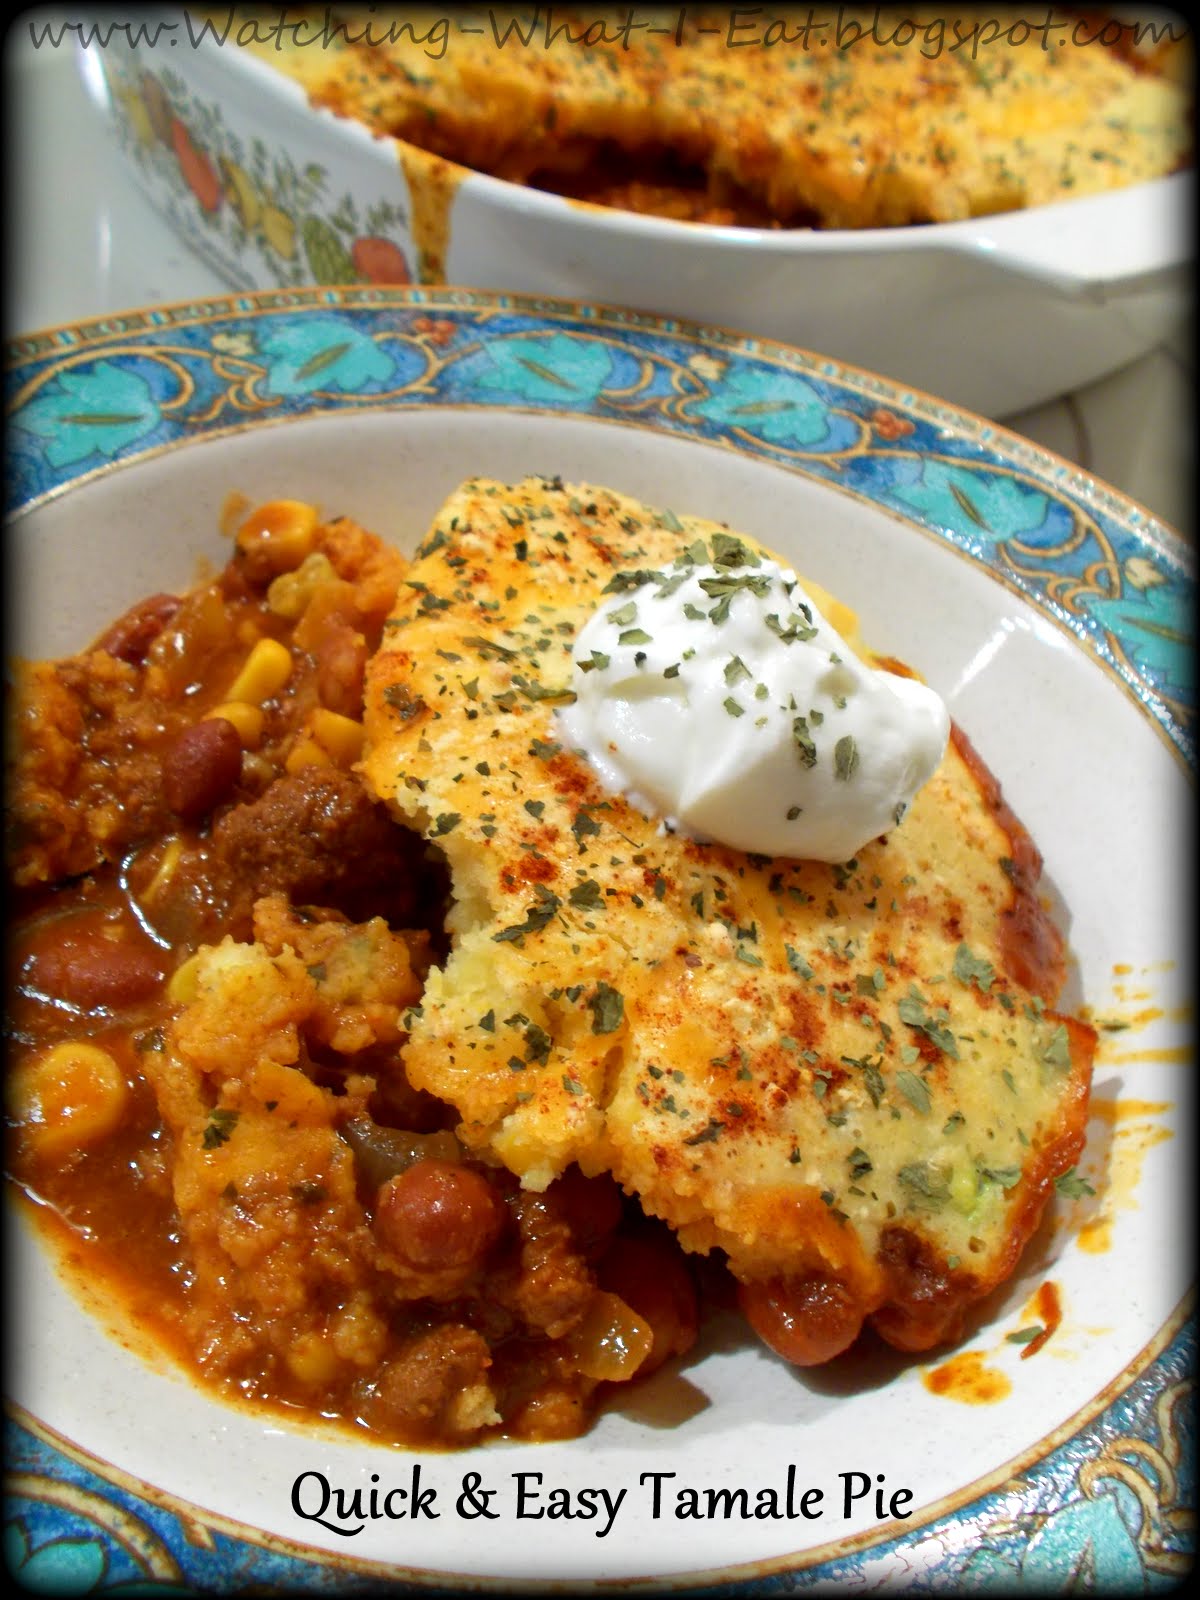 Watching What I Eat: Quick & Easy Tamale Pie